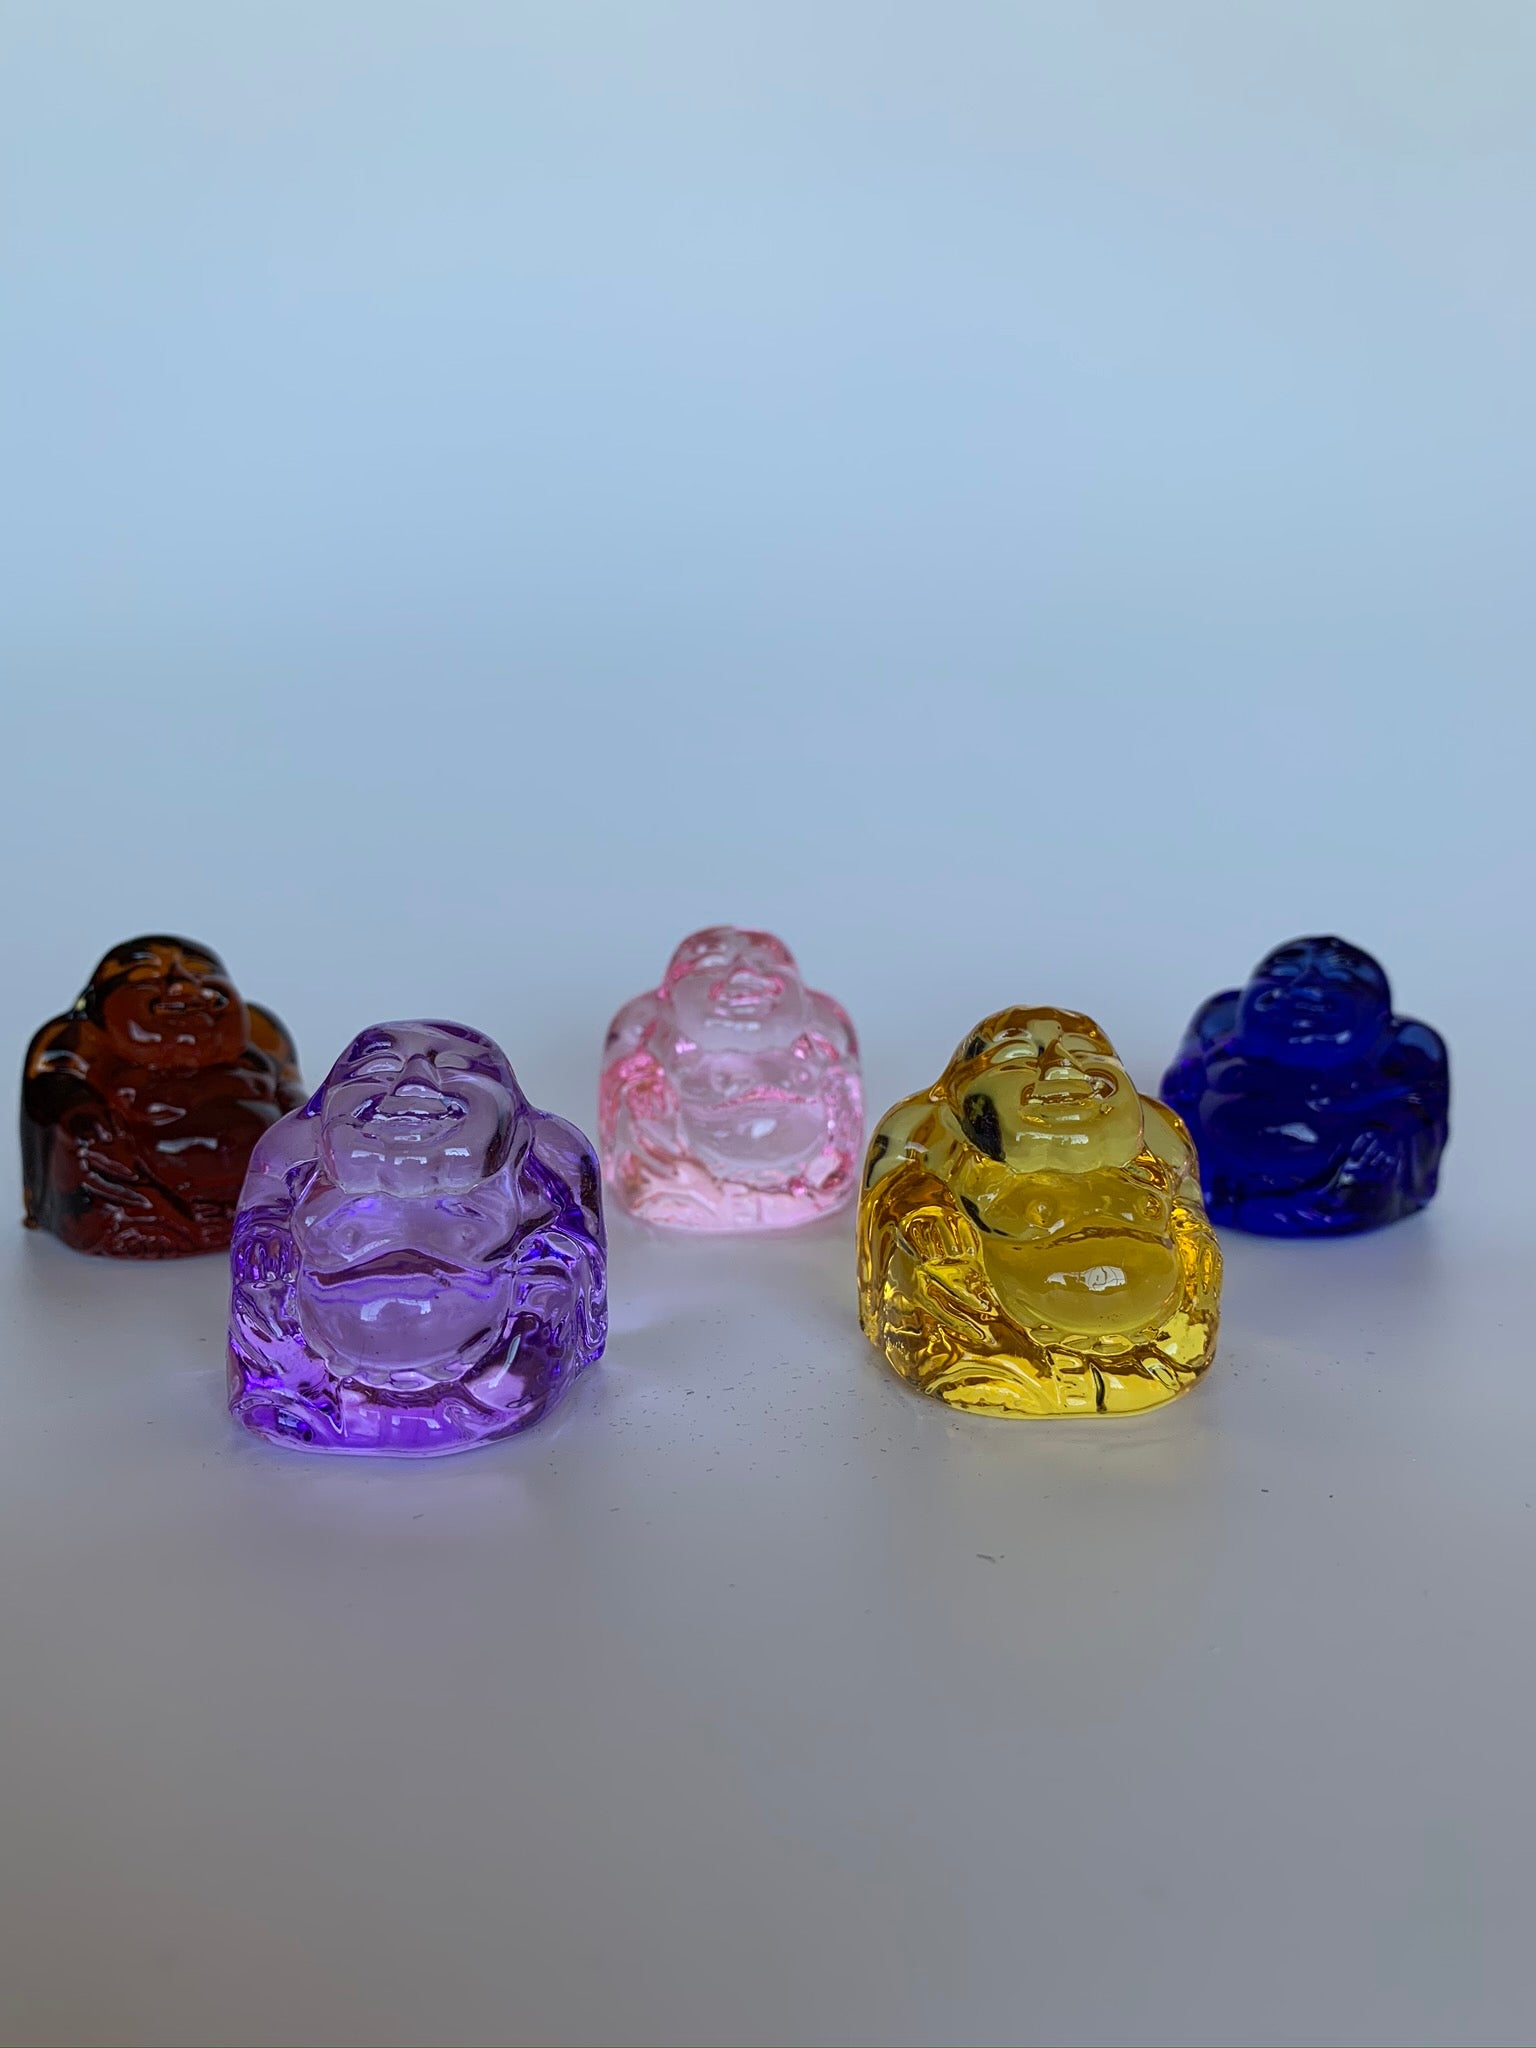 A Second view. Set of 5 Little glass Buddha statues in fun colors! Buy the set, give some away (or keep them all for yourself ;). Colors include purple, pink, amber, yellow/gold and blue. Buddha is revered around the world and his teachings and actions have shown us the beauty, wonder and power of enlightenment. The term Buddha refers to Awakened One.  Add one or more to your altar, meditation space or carry in your pocket or purse as a reminder of your spiritual journey.